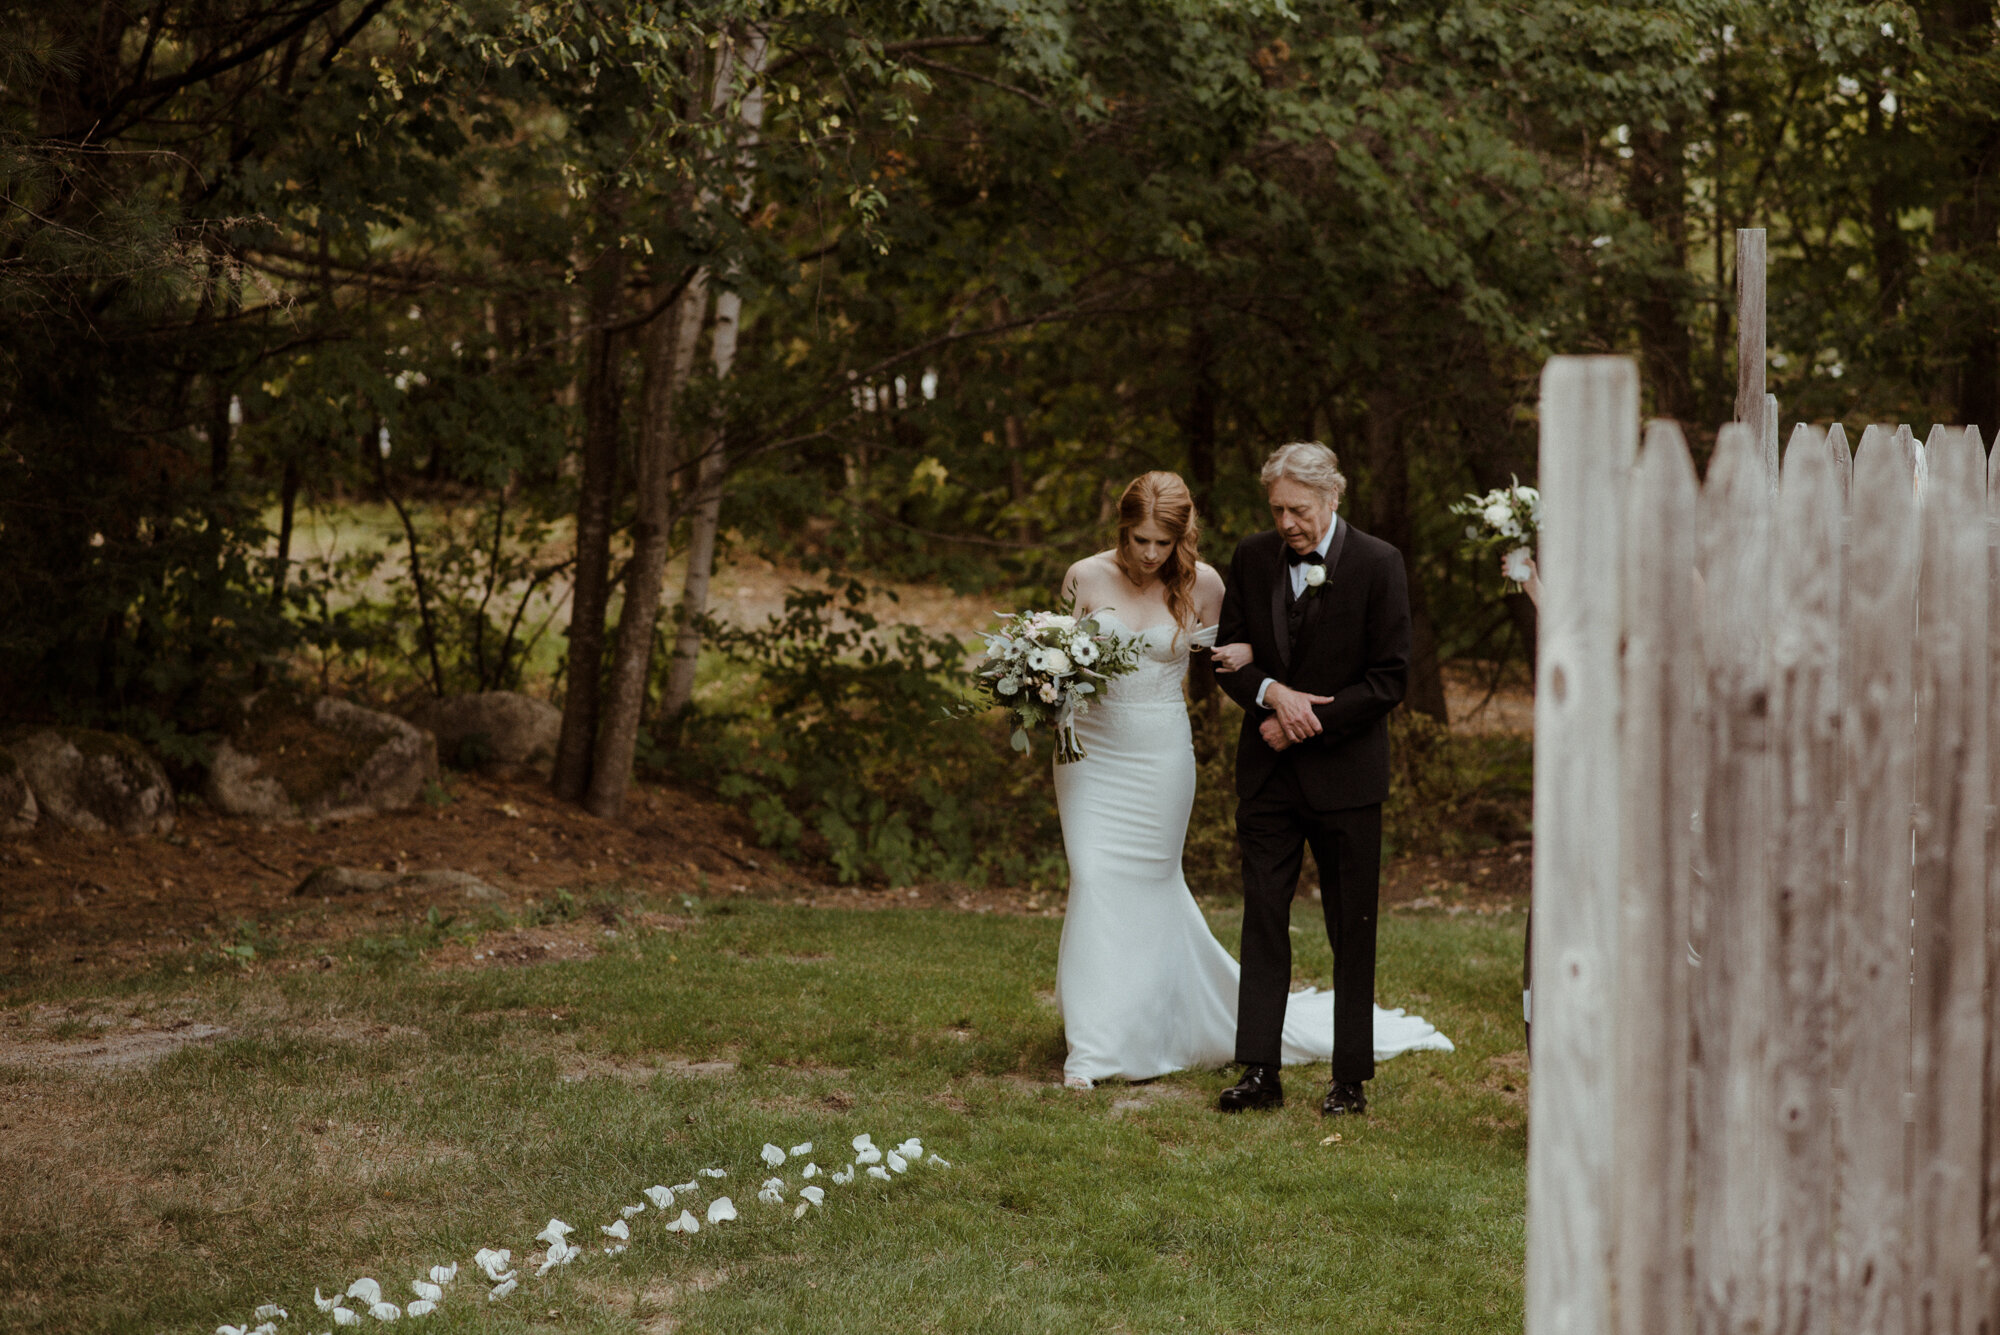 Autumn Elopement in New Hampshire - Backyard Wedding during COVID and Sunrise Hike in Wedding Dress - White Sails Creative_46.jpg